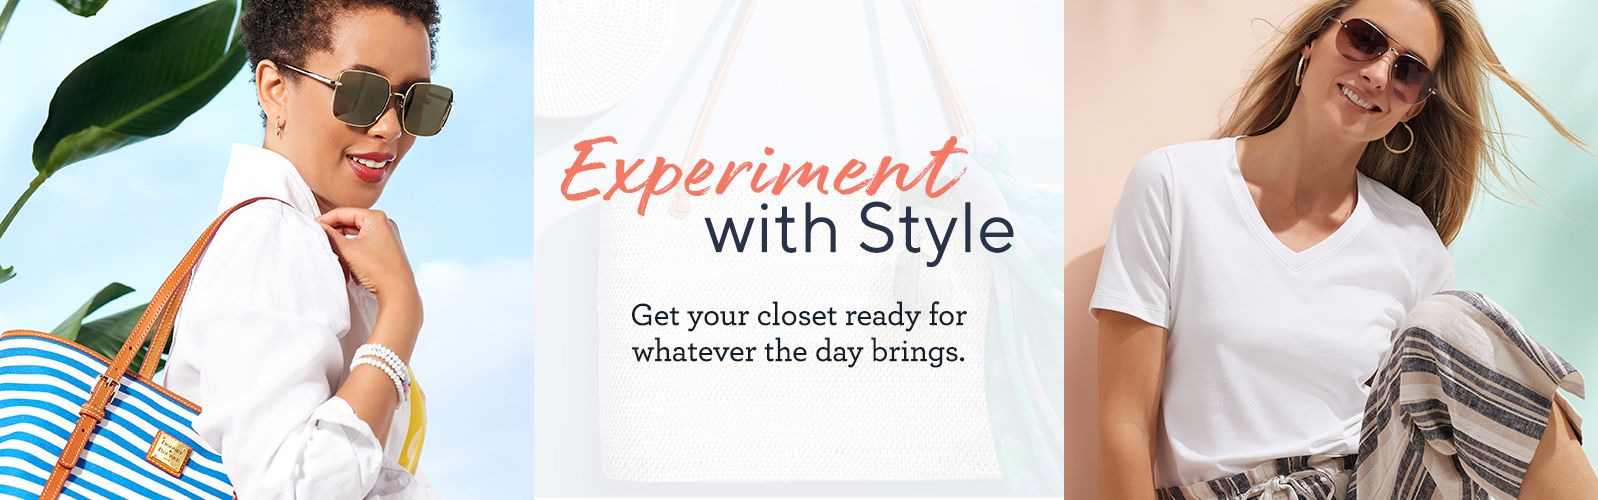 Experiment with Style  Get your closet ready for whatever the day brings.